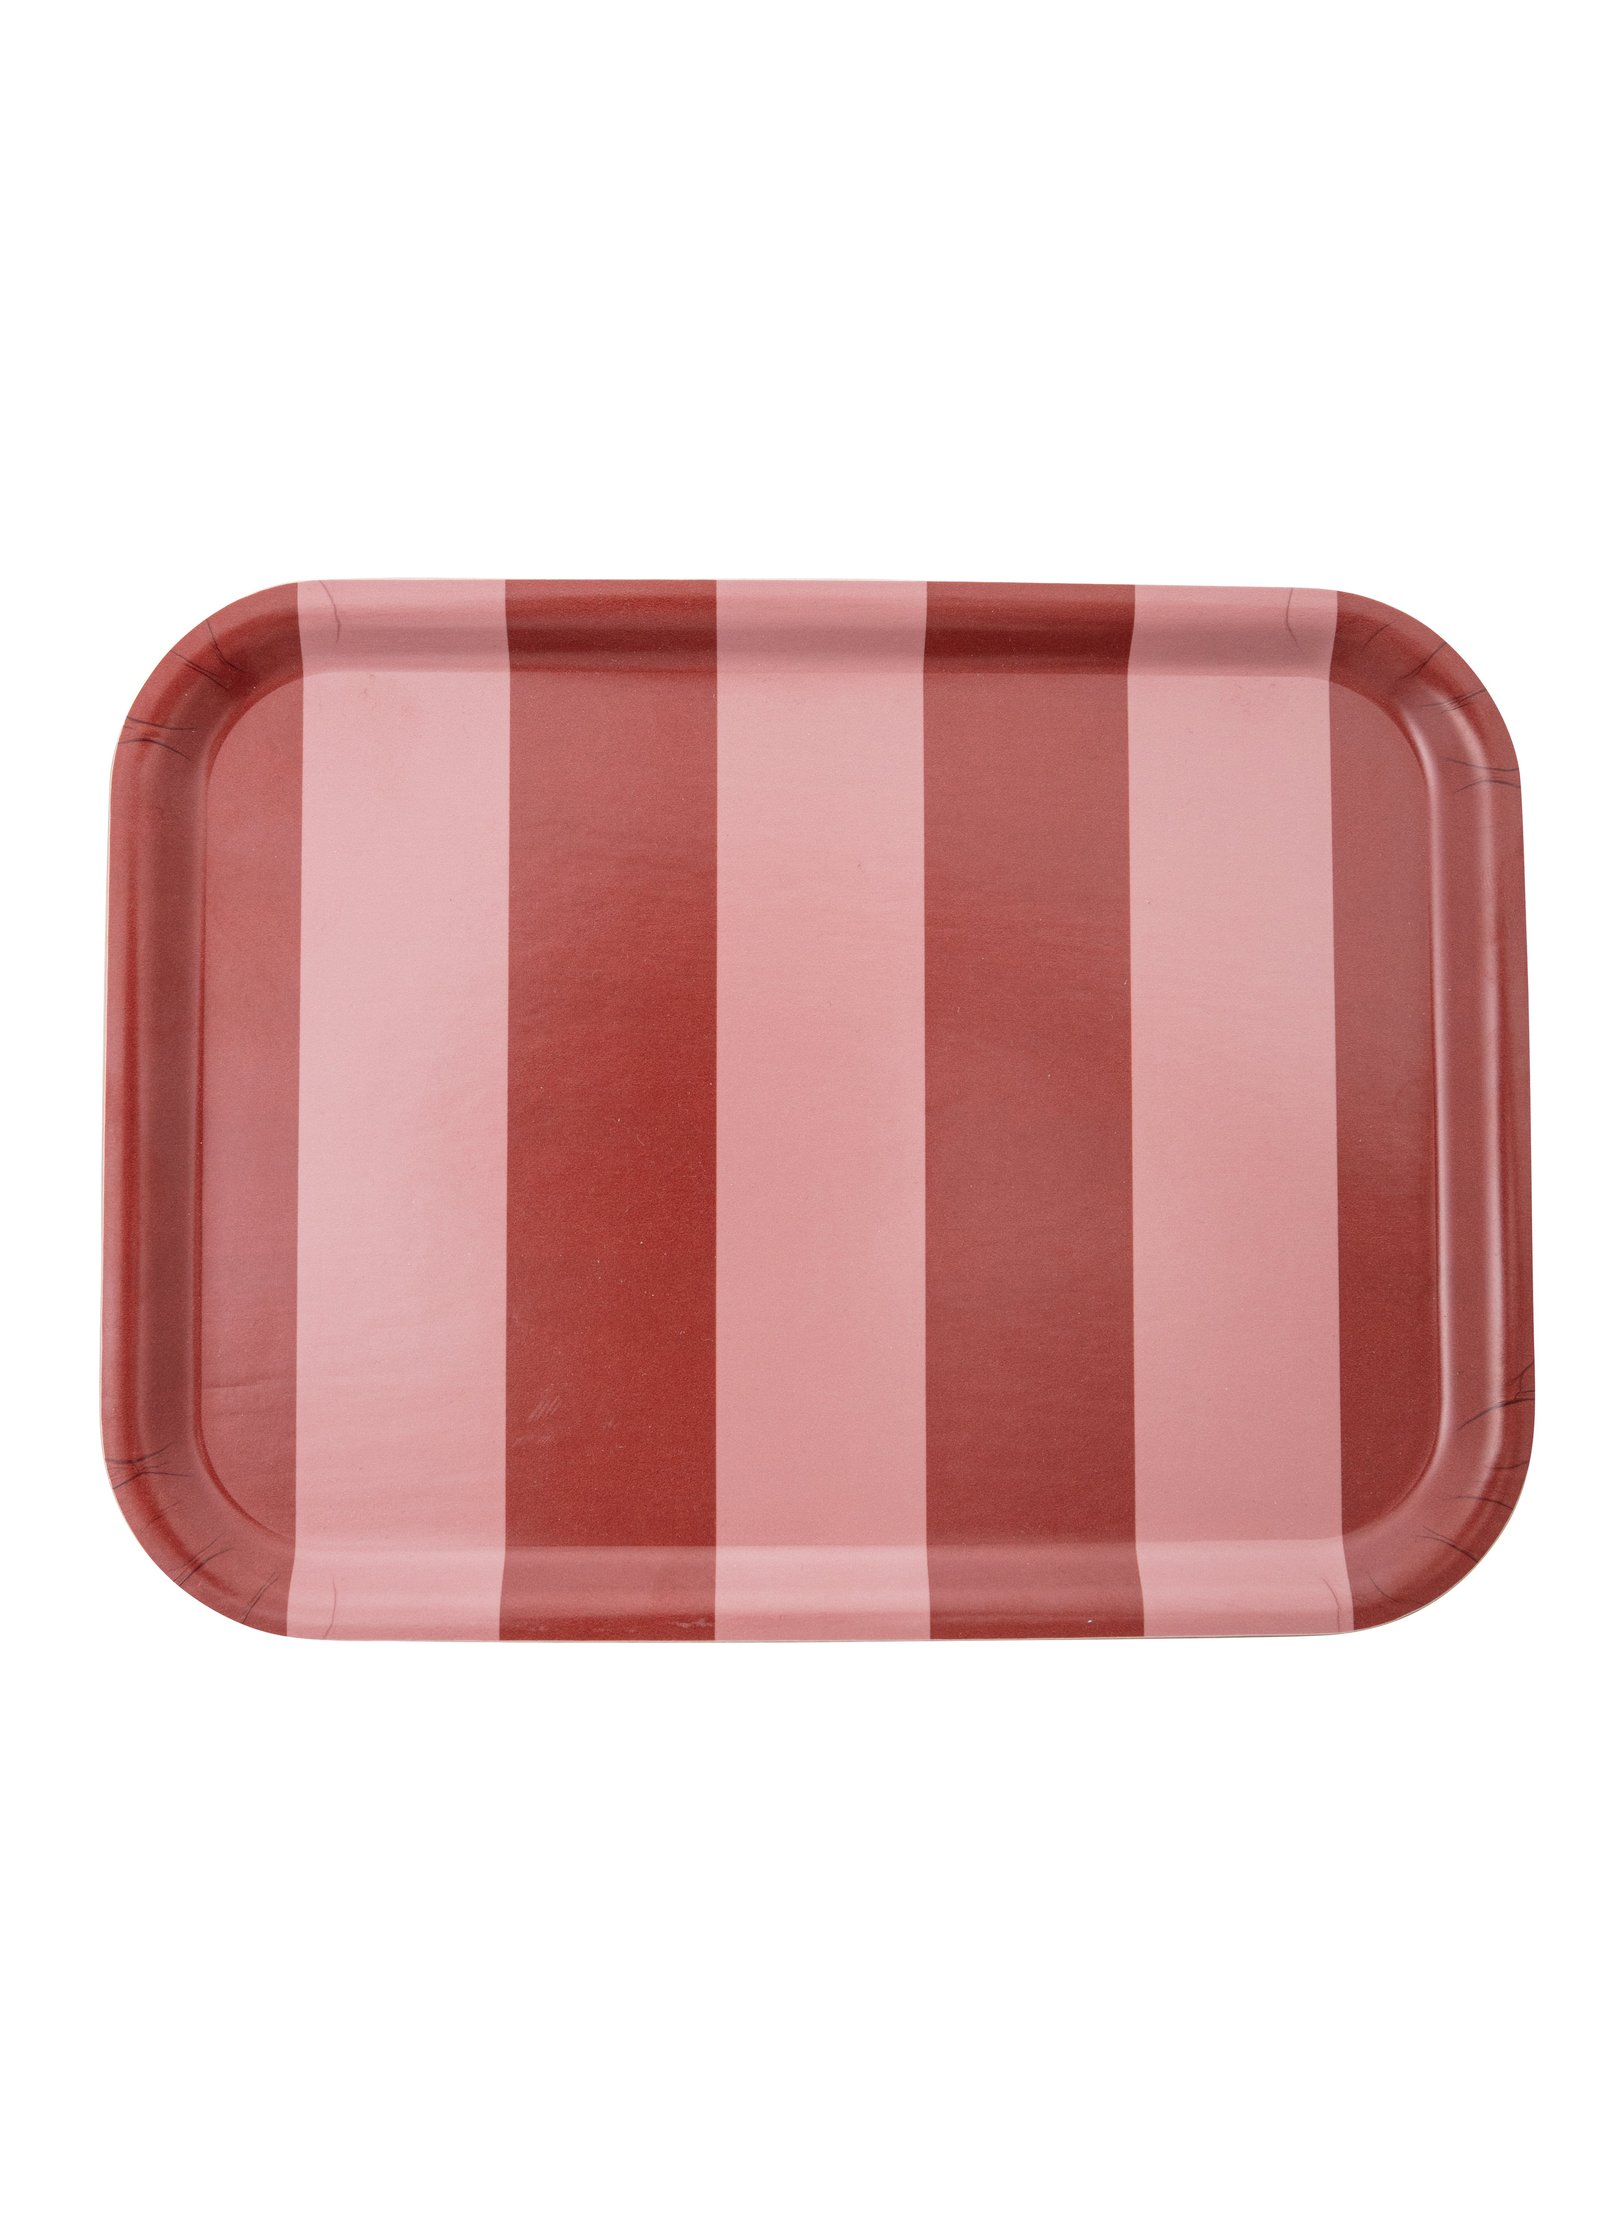 Patterned small tray Image 0